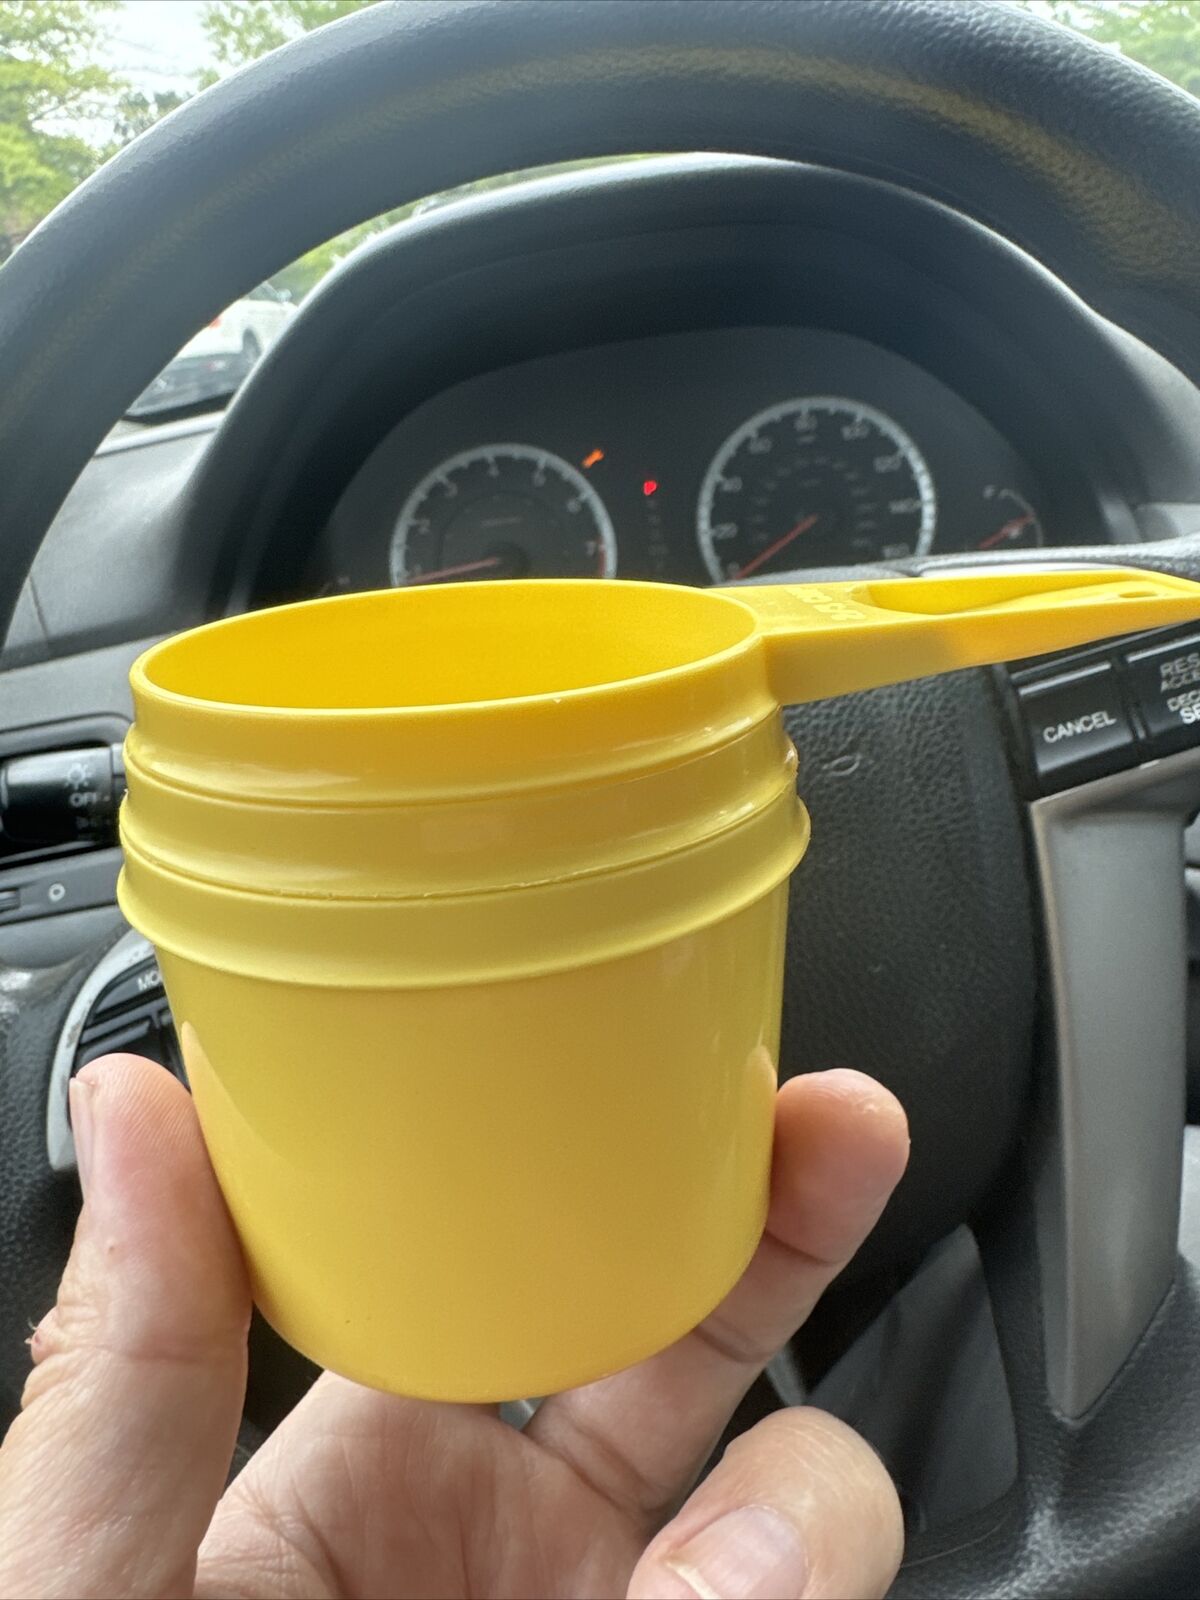 Tupperware Measuring Cups Set of 3 Yellow Lot Plastic Stacking Nesting Vintage